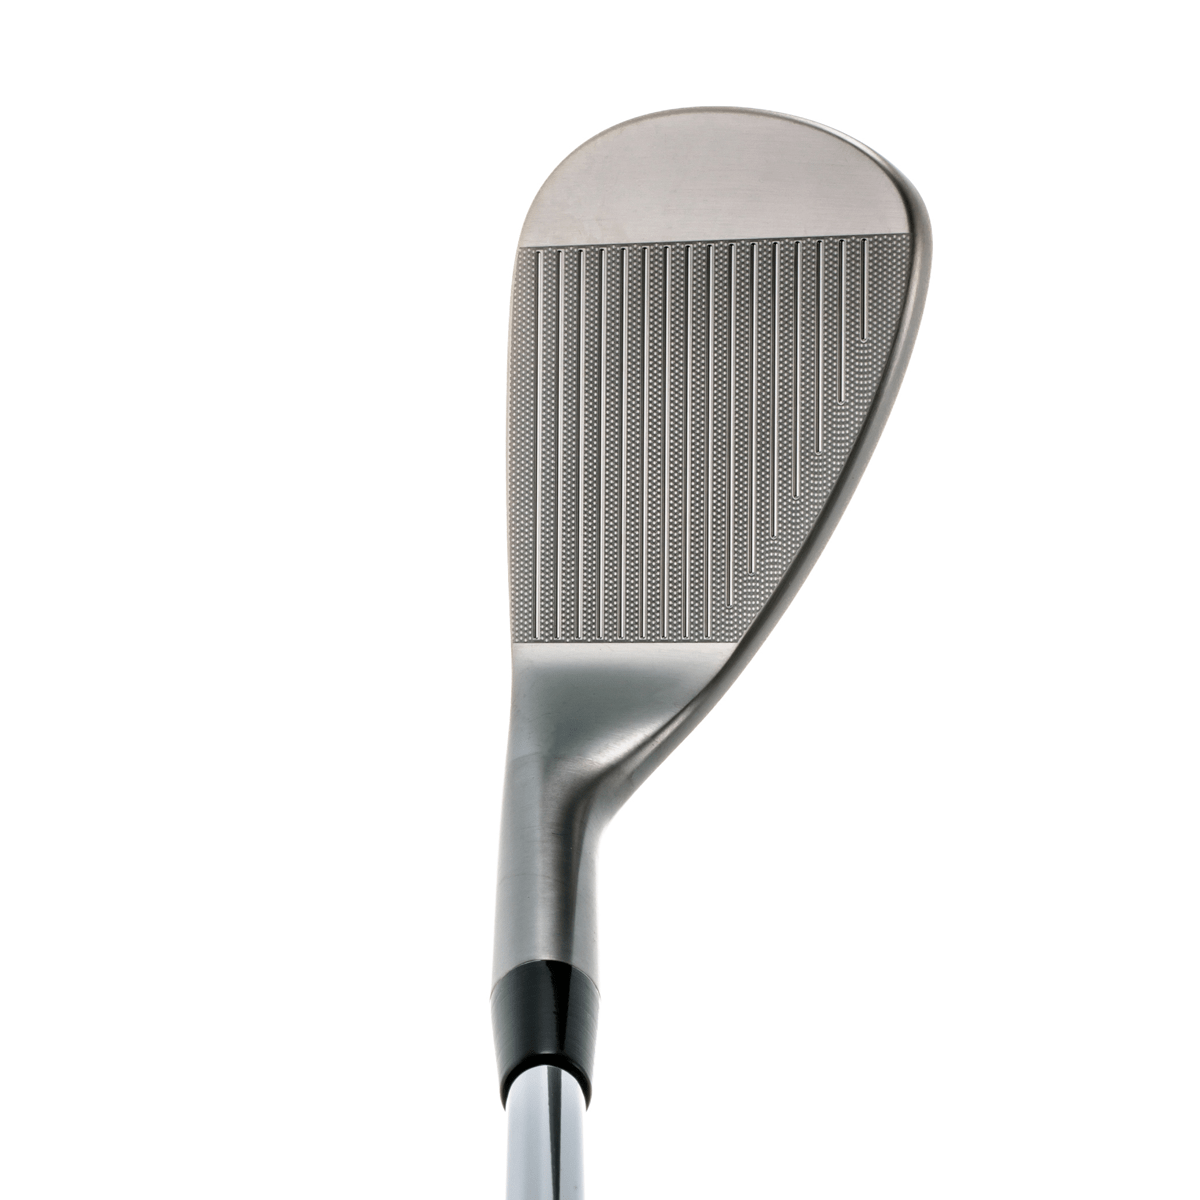 PROTOCONCEPT Golf, Forged Wedge - 39